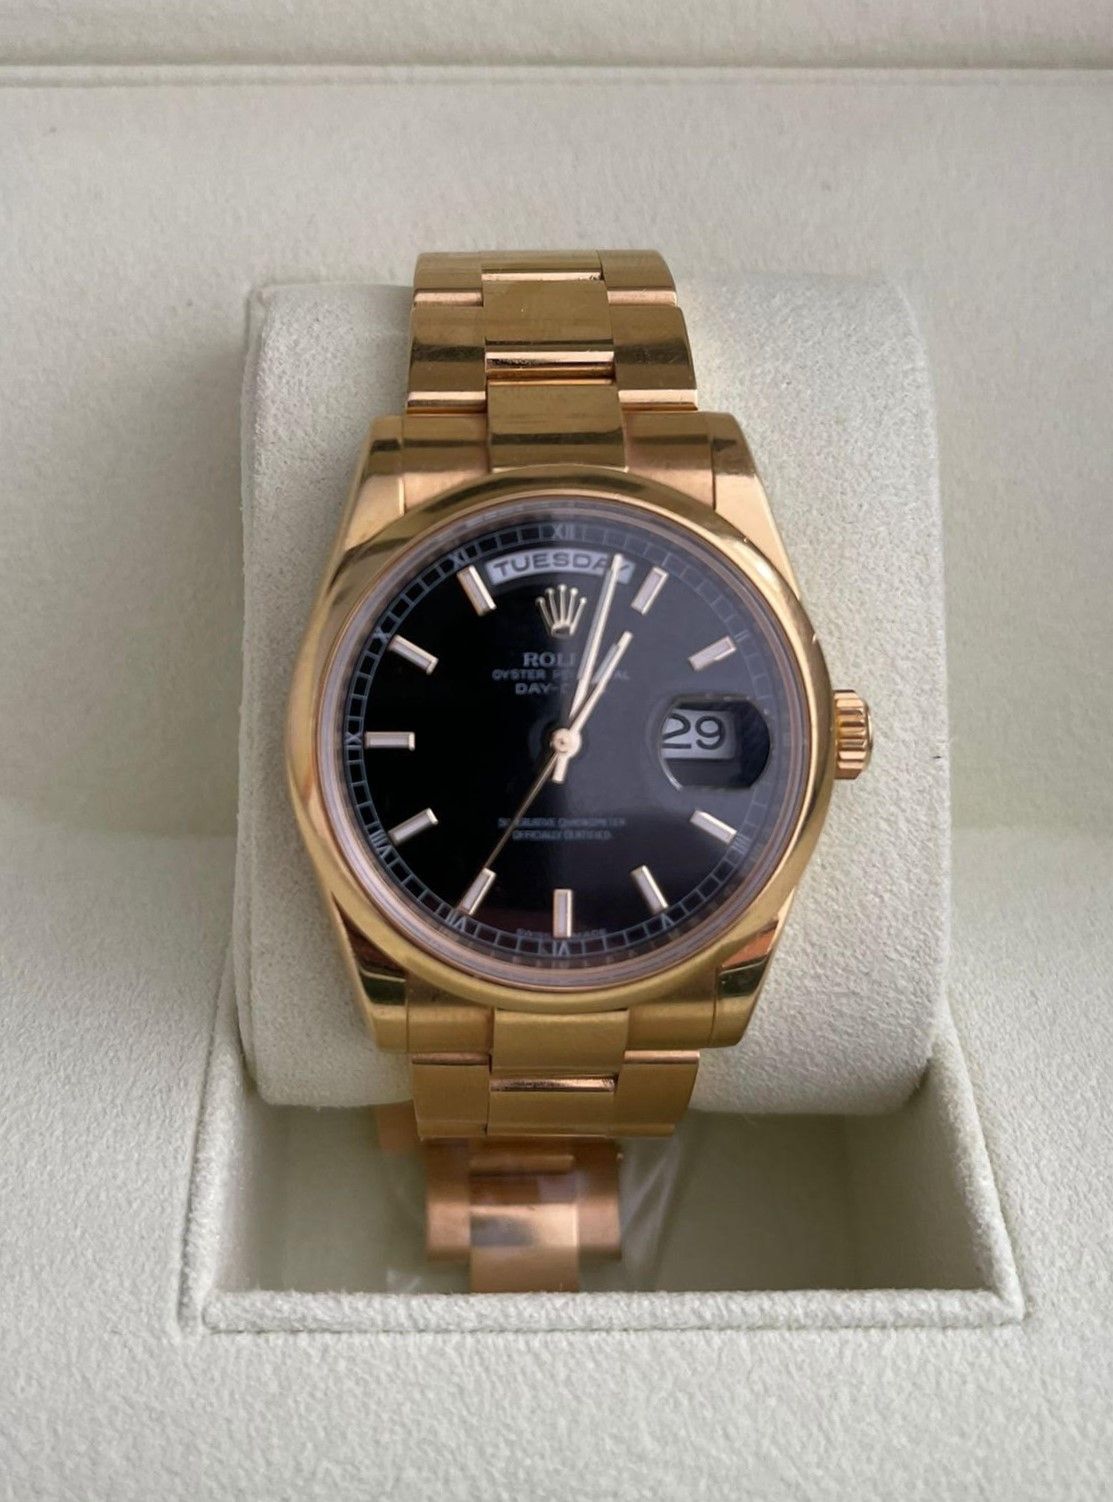 ROLEX Day Date 
ROLEX Oyster Perpetual Day Date en oro amarillo de 18 quilates

&hellip;